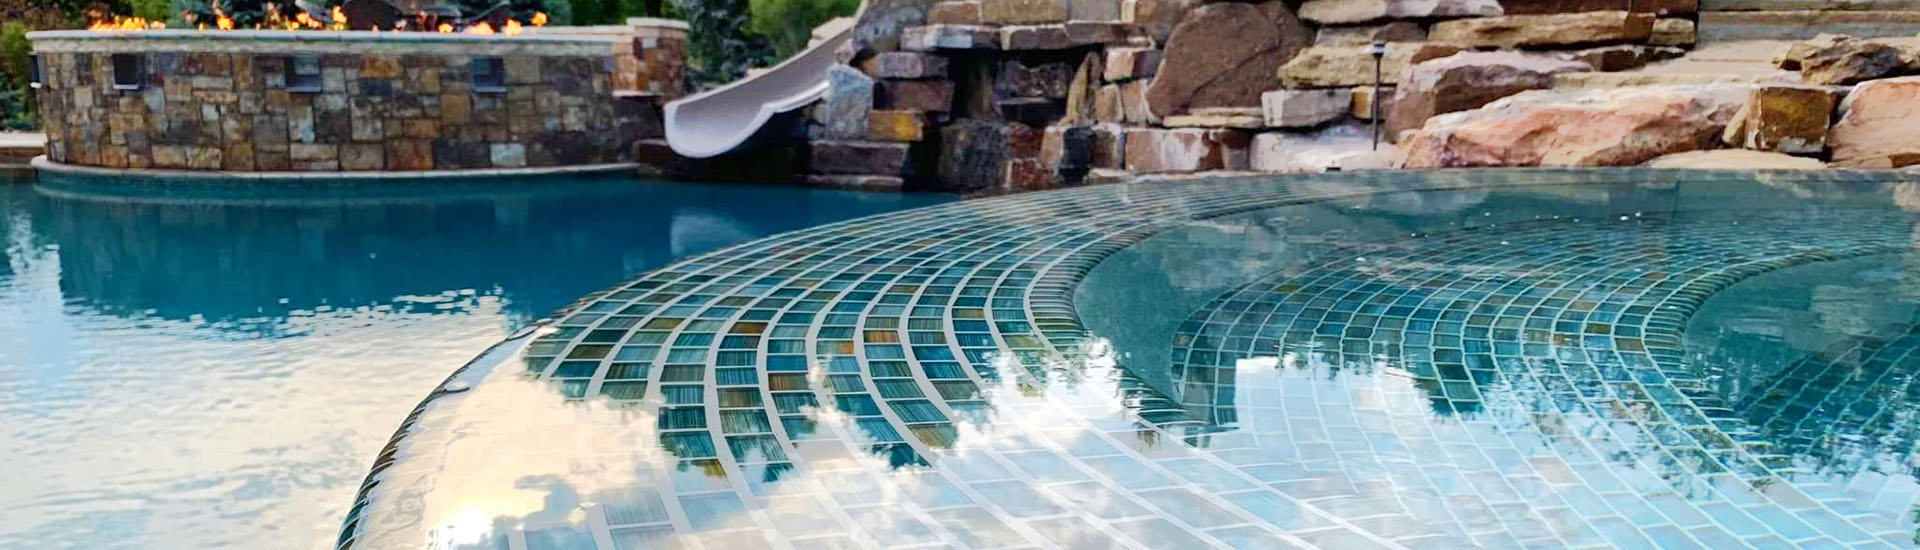 glass tile spa in a pool